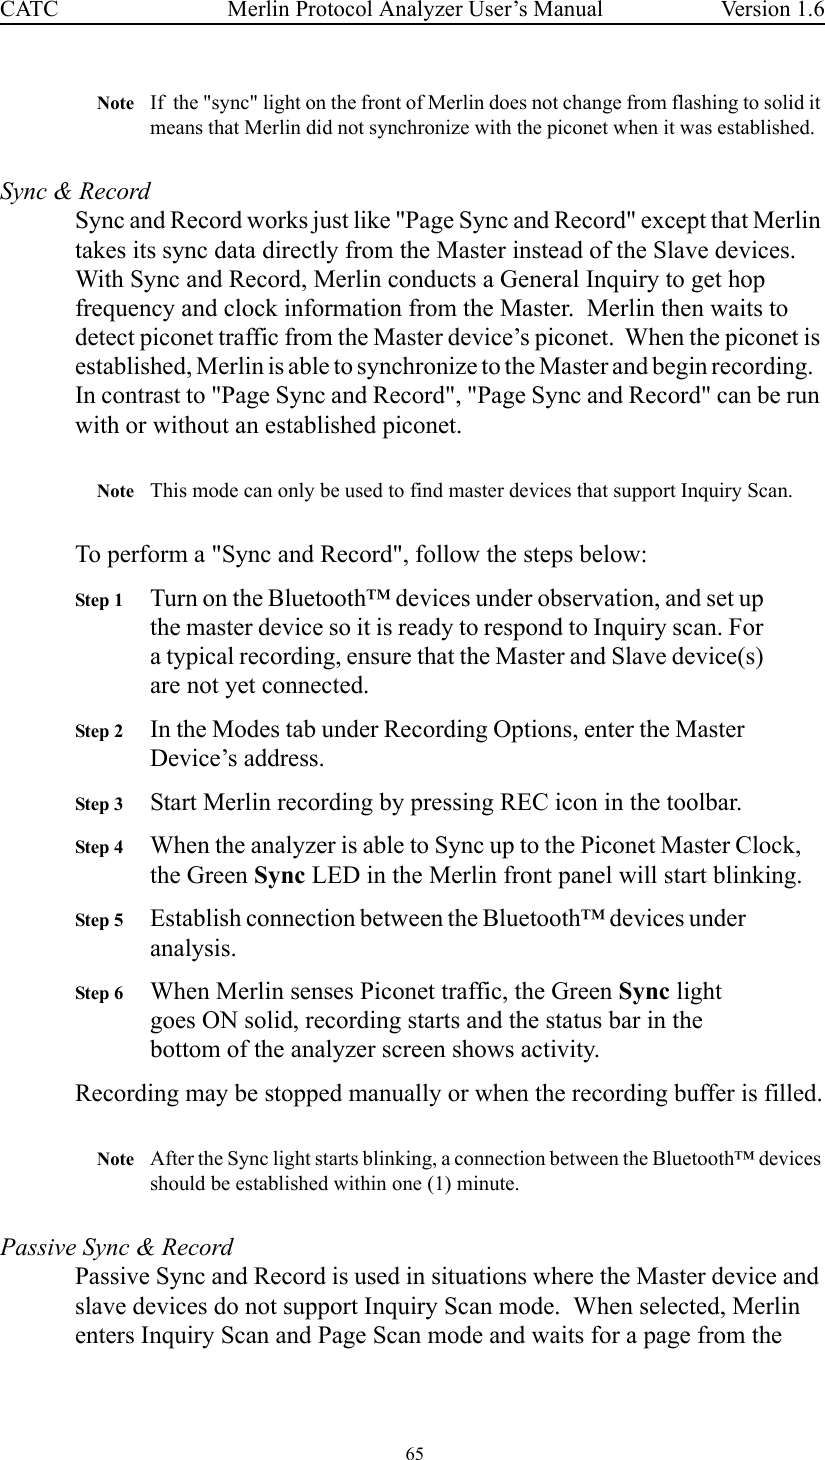  65 Merlin Protocol Analyzer User’s ManualCATC Version 1.6Note If  the &quot;sync&quot; light on the front of Merlin does not change from flashing to solid it means that Merlin did not synchronize with the piconet when it was established.  Sync &amp; RecordSync and Record works just like &quot;Page Sync and Record&quot; except that Merlin takes its sync data directly from the Master instead of the Slave devices.  With Sync and Record, Merlin conducts a General Inquiry to get hop frequency and clock information from the Master.  Merlin then waits to detect piconet traffic from the Master device’s piconet.  When the piconet is established, Merlin is able to synchronize to the Master and begin recording.   In contrast to &quot;Page Sync and Record&quot;, &quot;Page Sync and Record&quot; can be run with or without an established piconet.  Note This mode can only be used to find master devices that support Inquiry Scan. To perform a &quot;Sync and Record&quot;, follow the steps below:Step 1 Turn on the Bluetooth™ devices under observation, and set up the master device so it is ready to respond to Inquiry scan. For a typical recording, ensure that the Master and Slave device(s) are not yet connected.Step 2 In the Modes tab under Recording Options, enter the Master Device’s address.Step 3 Start Merlin recording by pressing REC icon in the toolbar.Step 4 When the analyzer is able to Sync up to the Piconet Master Clock, the Green Sync LED in the Merlin front panel will start blinking.Step 5 Establish connection between the Bluetooth™ devices under analysis.Step 6 When Merlin senses Piconet traffic, the Green Sync light goes ON solid, recording starts and the status bar in the bottom of the analyzer screen shows activity.Recording may be stopped manually or when the recording buffer is filled.Note After the Sync light starts blinking, a connection between the Bluetooth™ devices should be established within one (1) minute.Passive Sync &amp; RecordPassive Sync and Record is used in situations where the Master device and slave devices do not support Inquiry Scan mode.  When selected, Merlin enters Inquiry Scan and Page Scan mode and waits for a page from the 